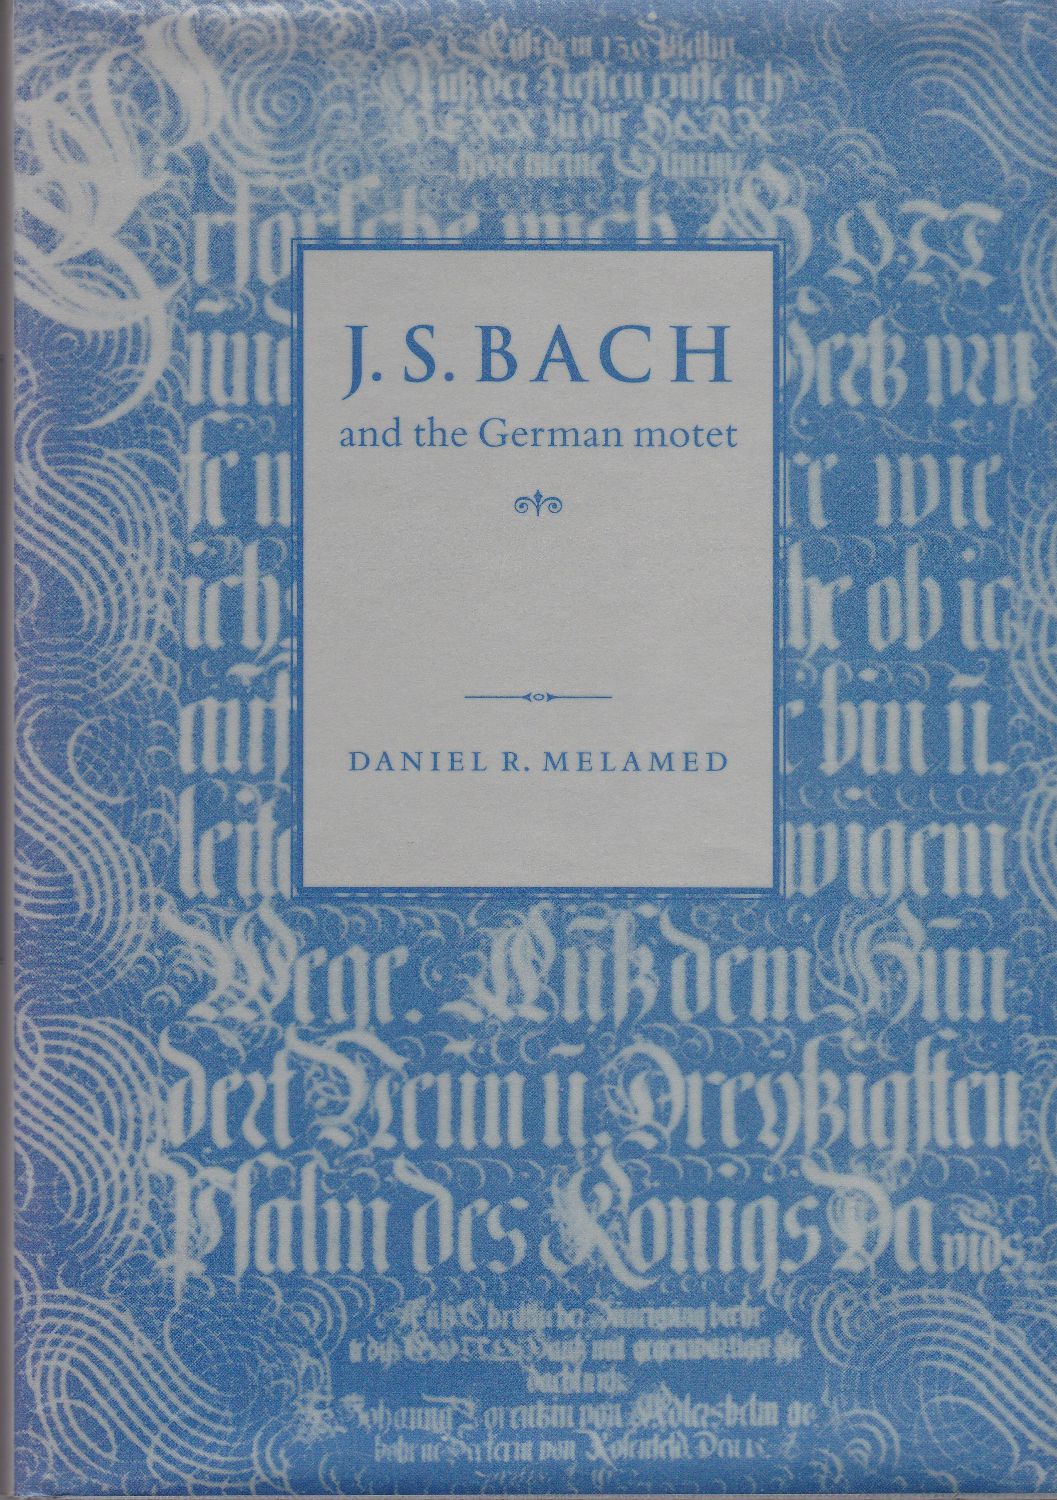 J.S. Bach and the German motet.